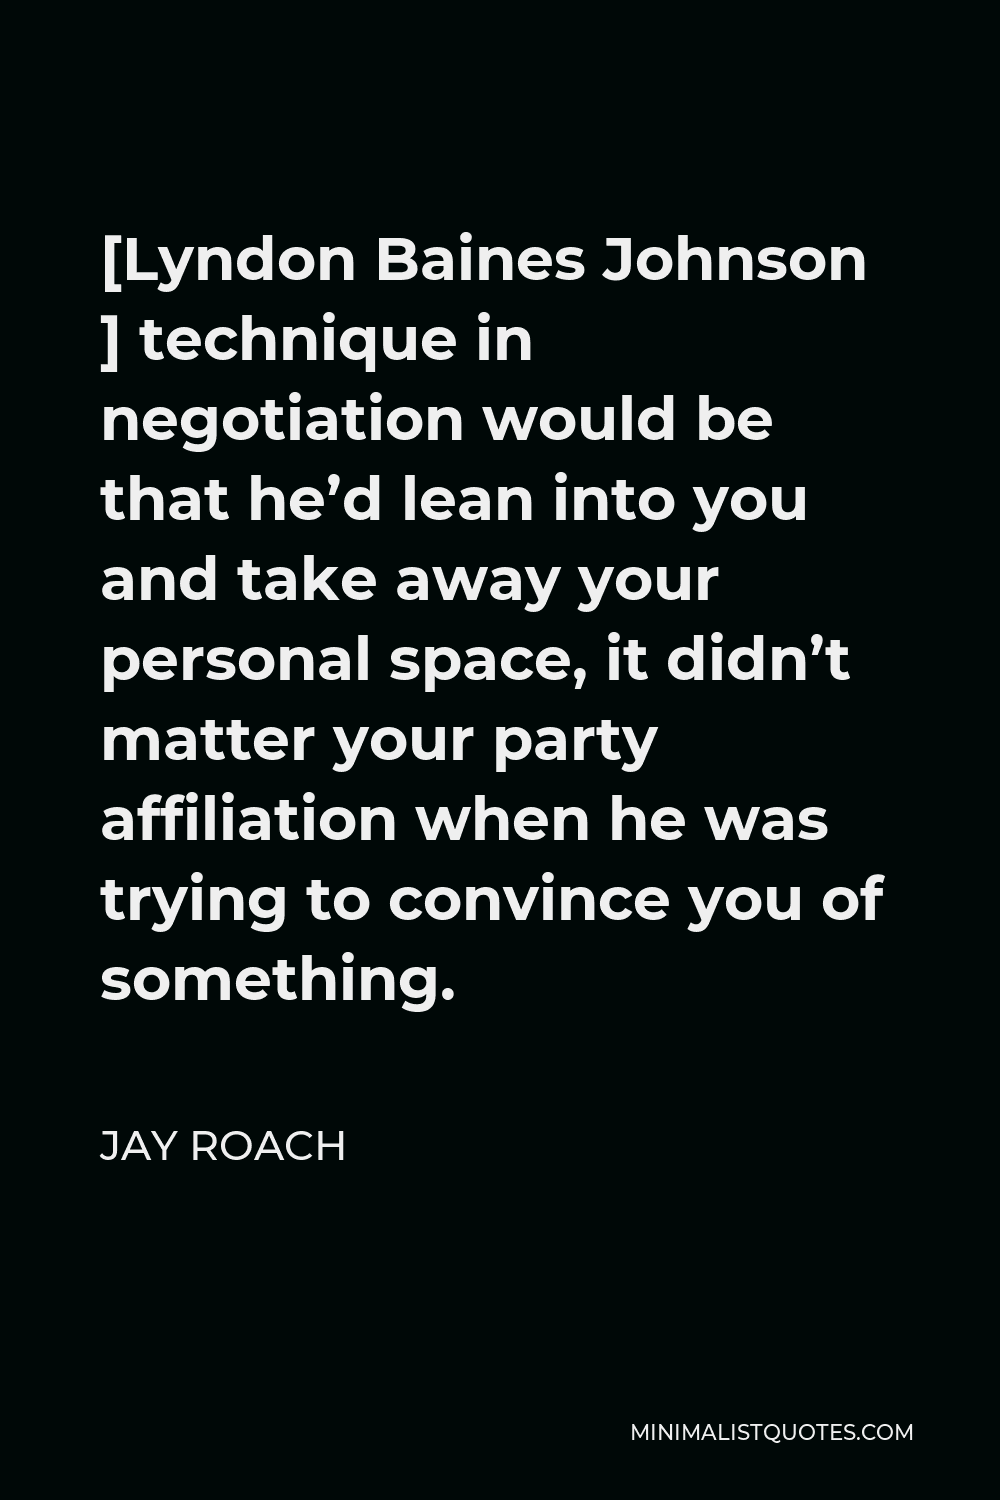 Jay Roach Quote - [Lyndon Baines Johnson ] technique in negotiation would be that he’d lean into you and take away your personal space, it didn’t matter your party affiliation when he was trying to convince you of something.